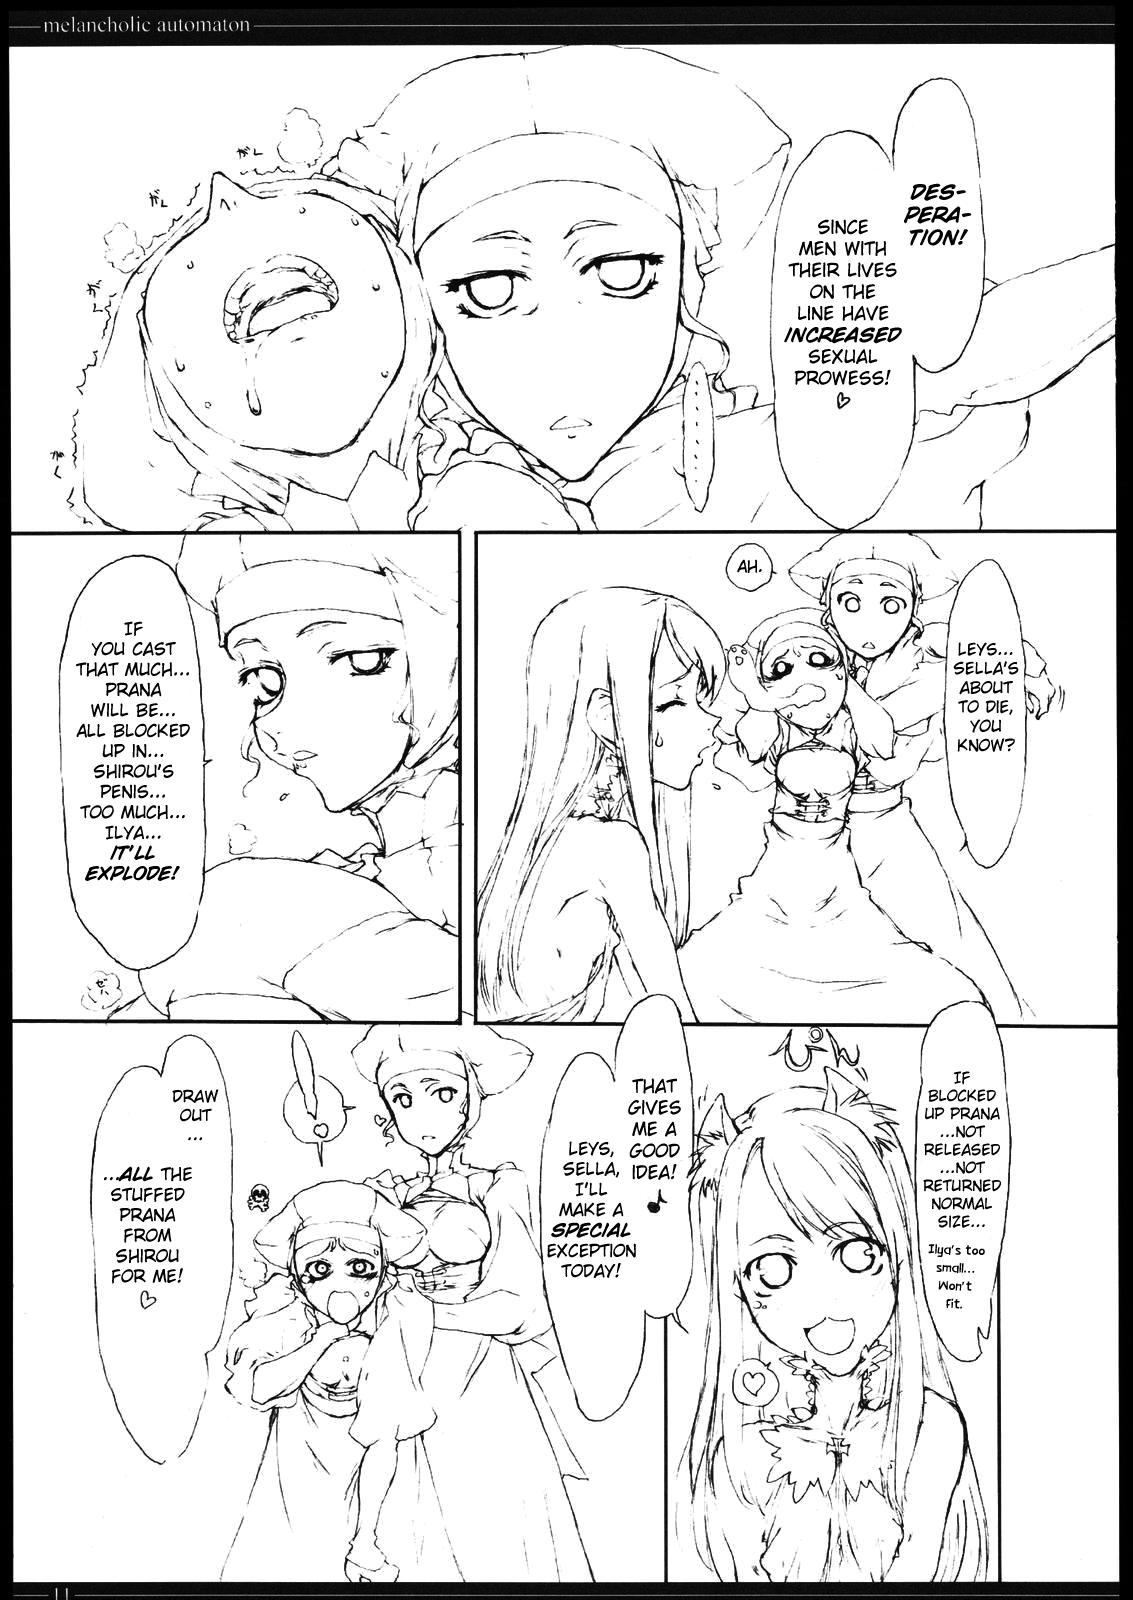 Perfect Pussy Melancholic Automaton - One day at the castle of Einzbern - Fate stay night Atm - Page 10